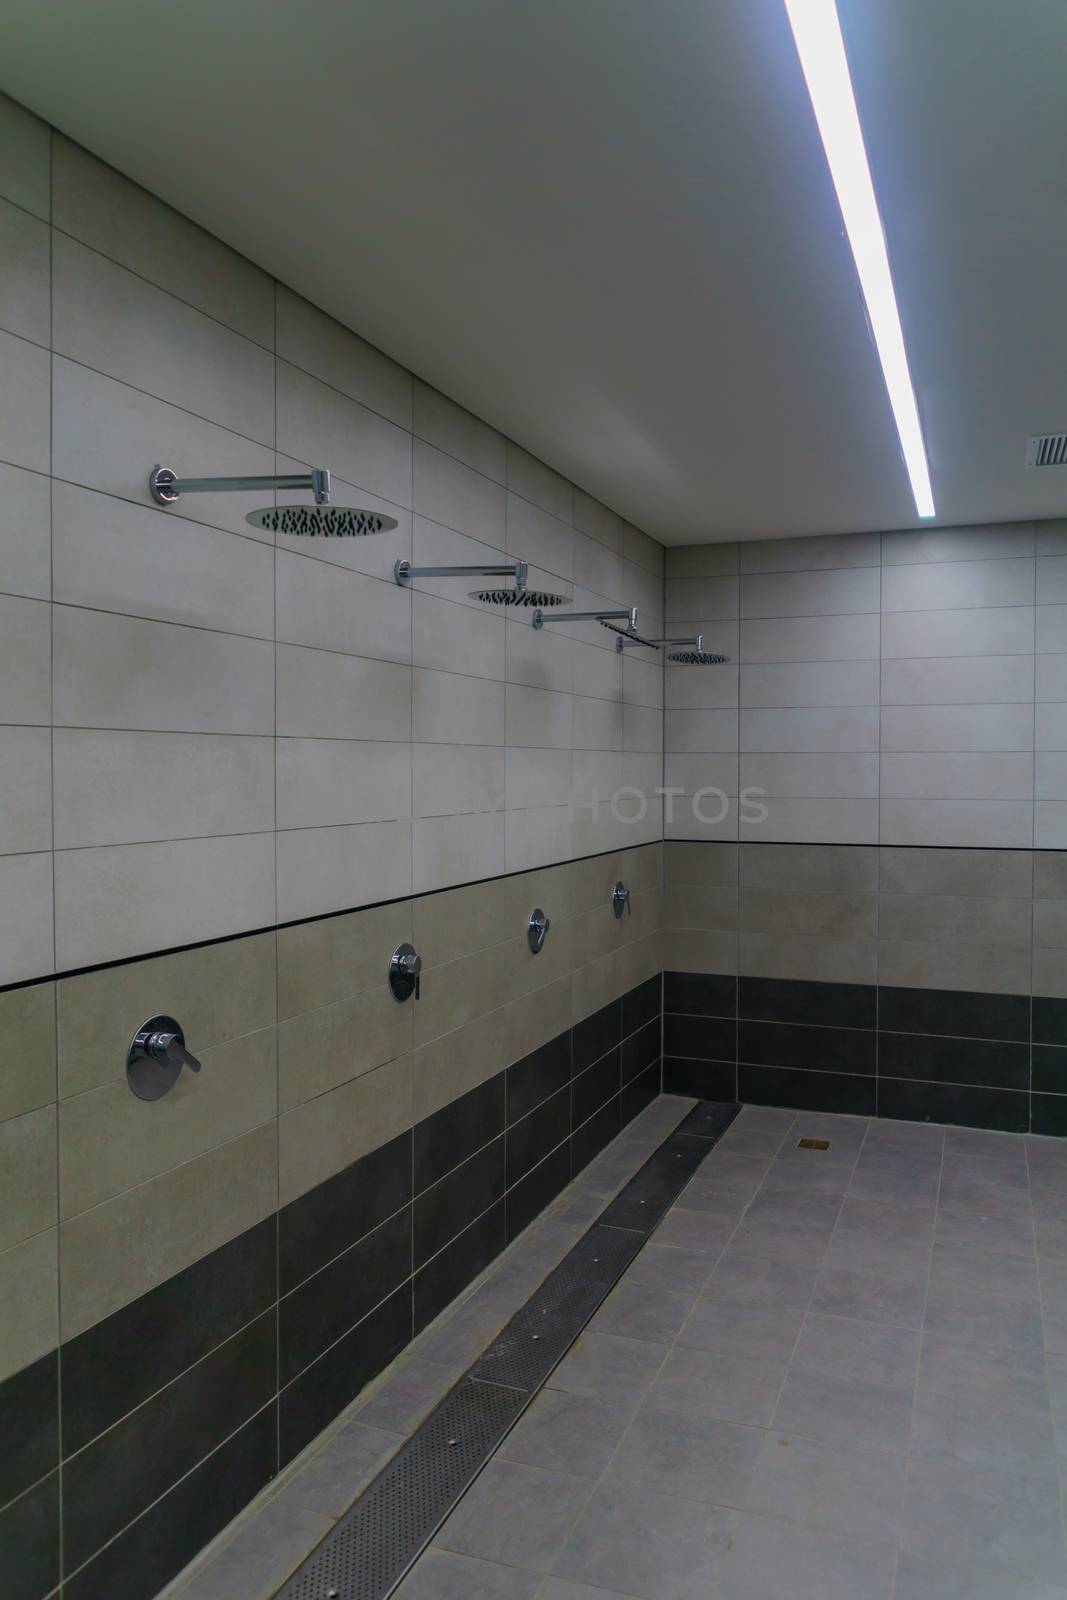 Players showers in the renovated Bloomfield Stadium, in Jaffa. T by RnDmS